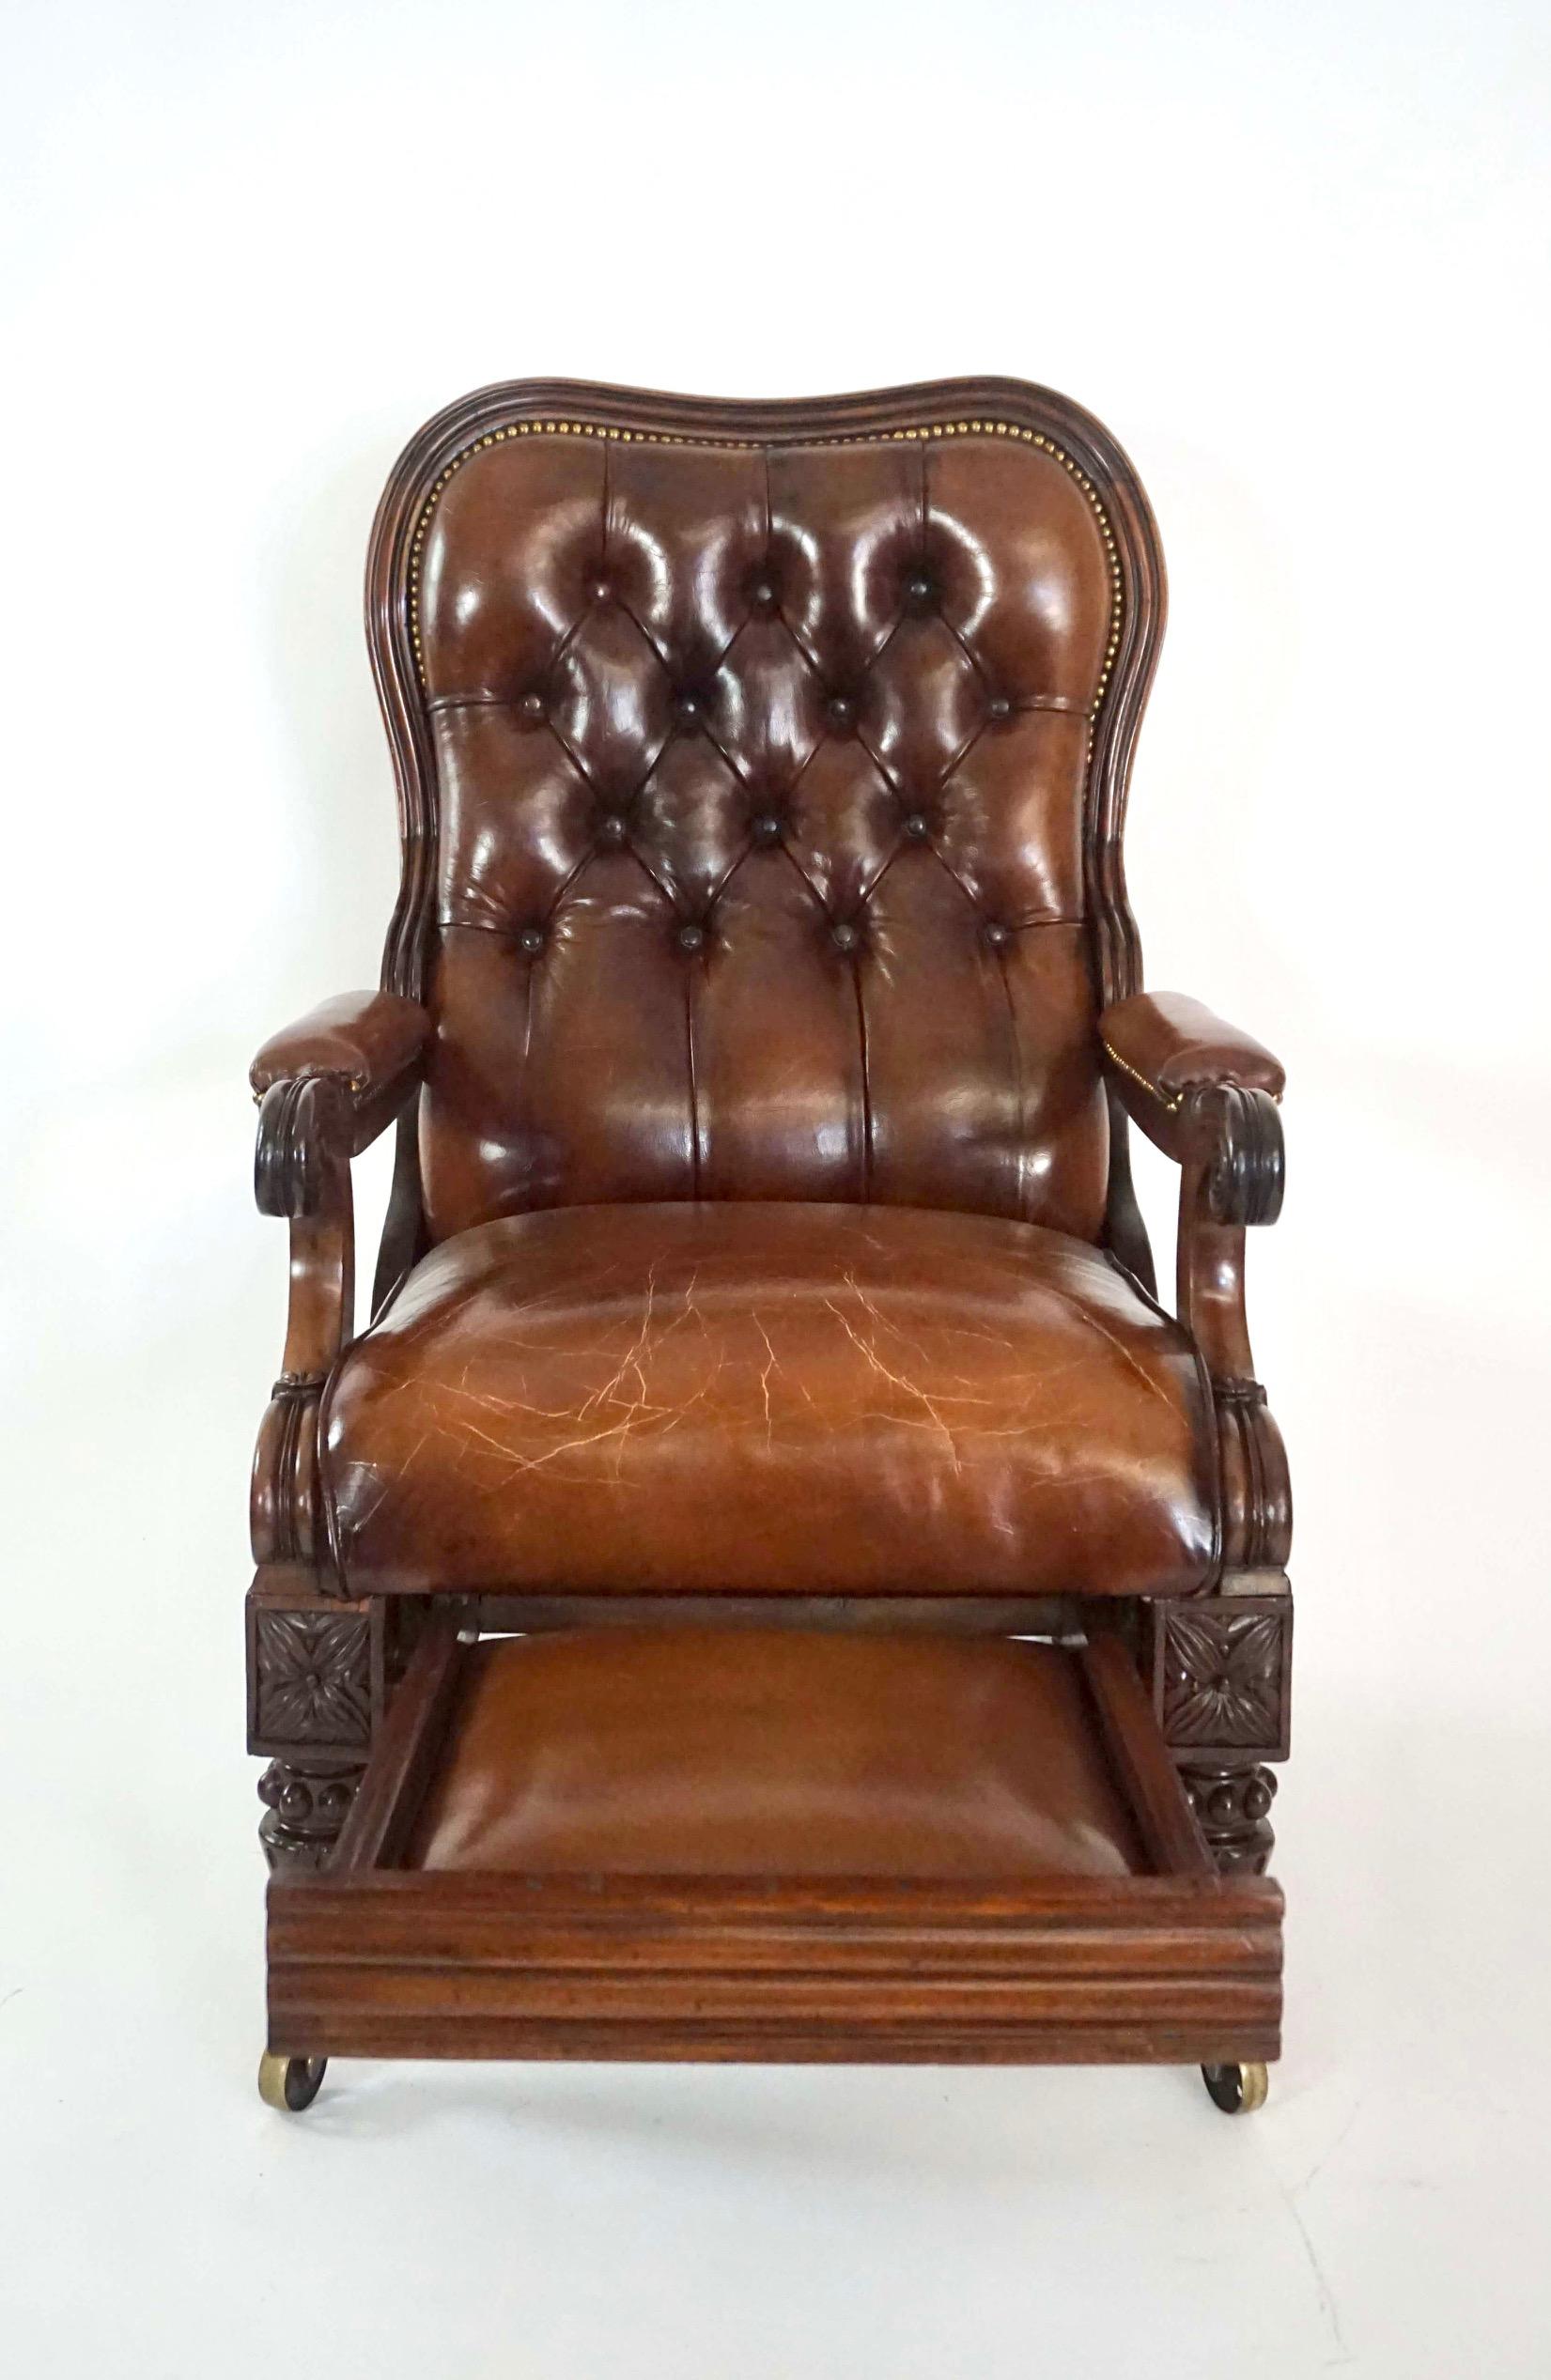 Regency Leather Upholstered Mahogany Reclining Armchair, circa 1830 For Sale 2